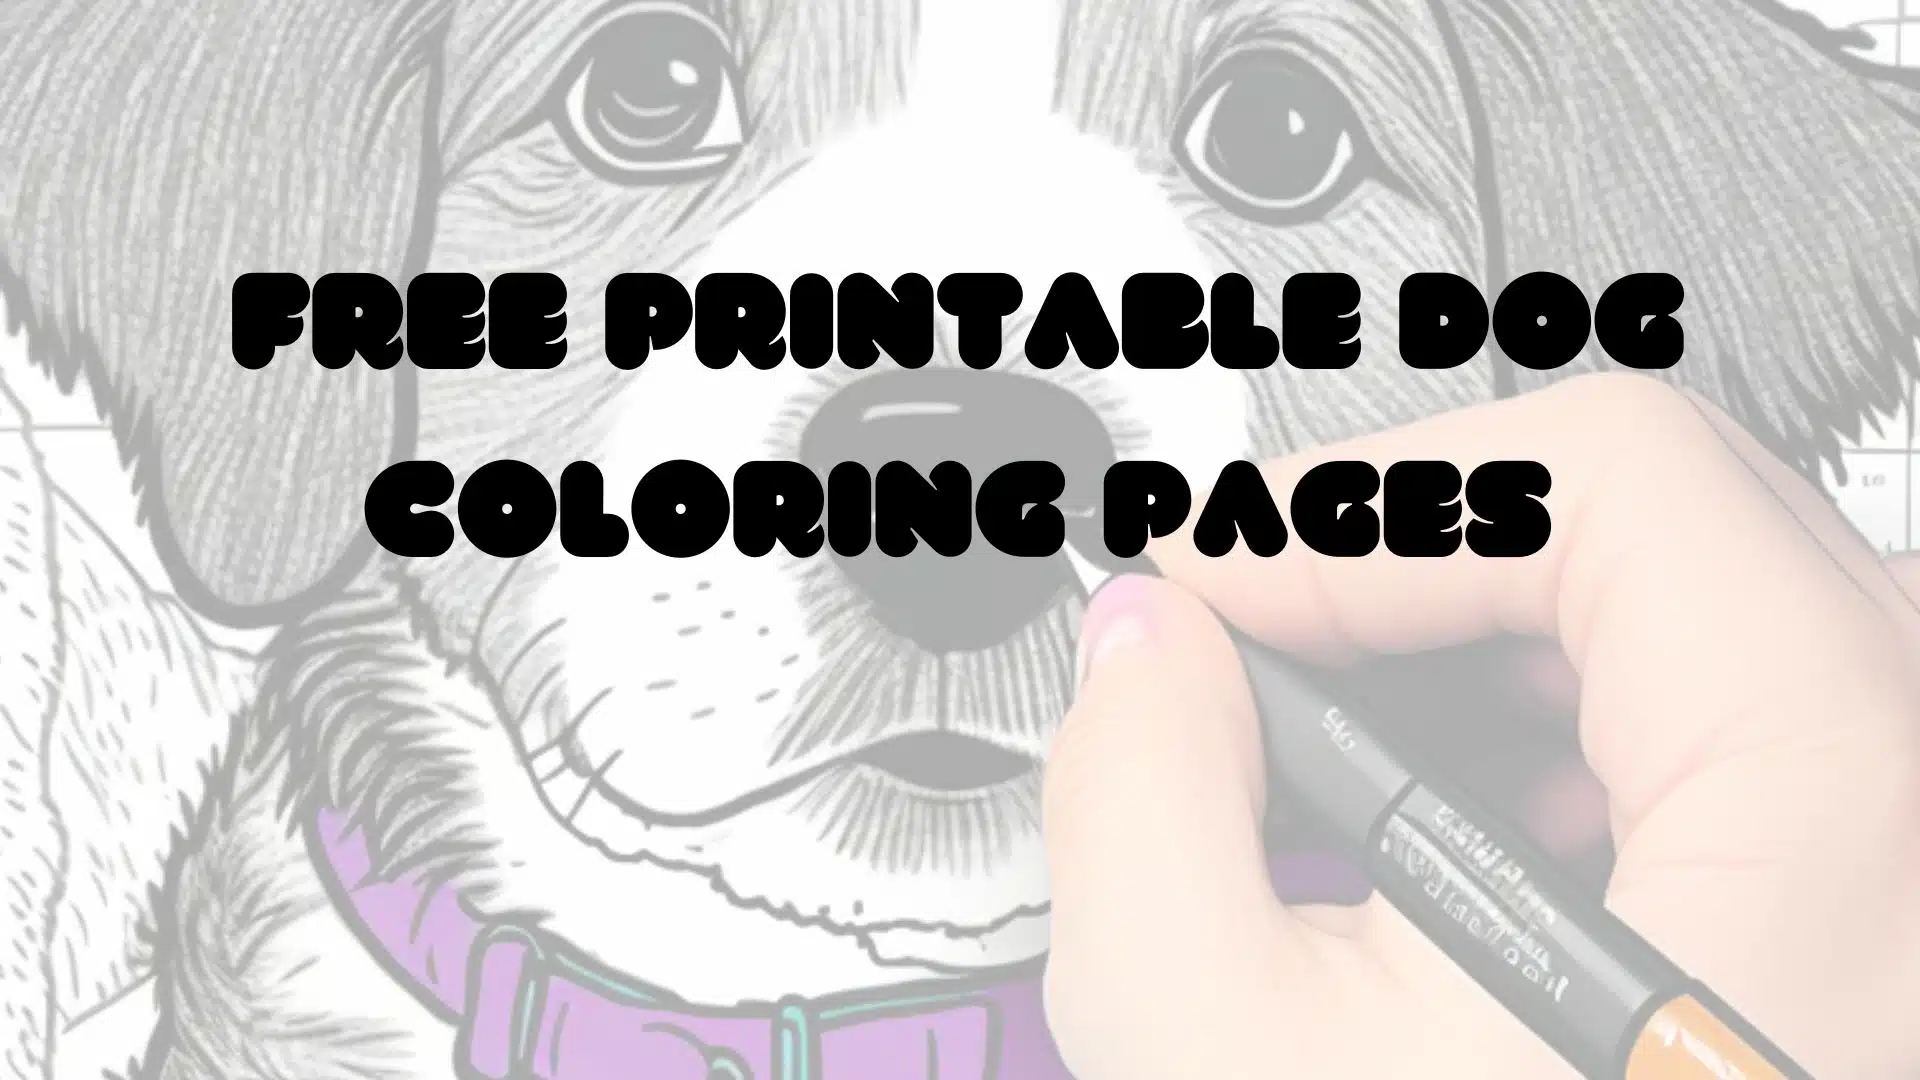 Free Printable Dog Coloring Pages List